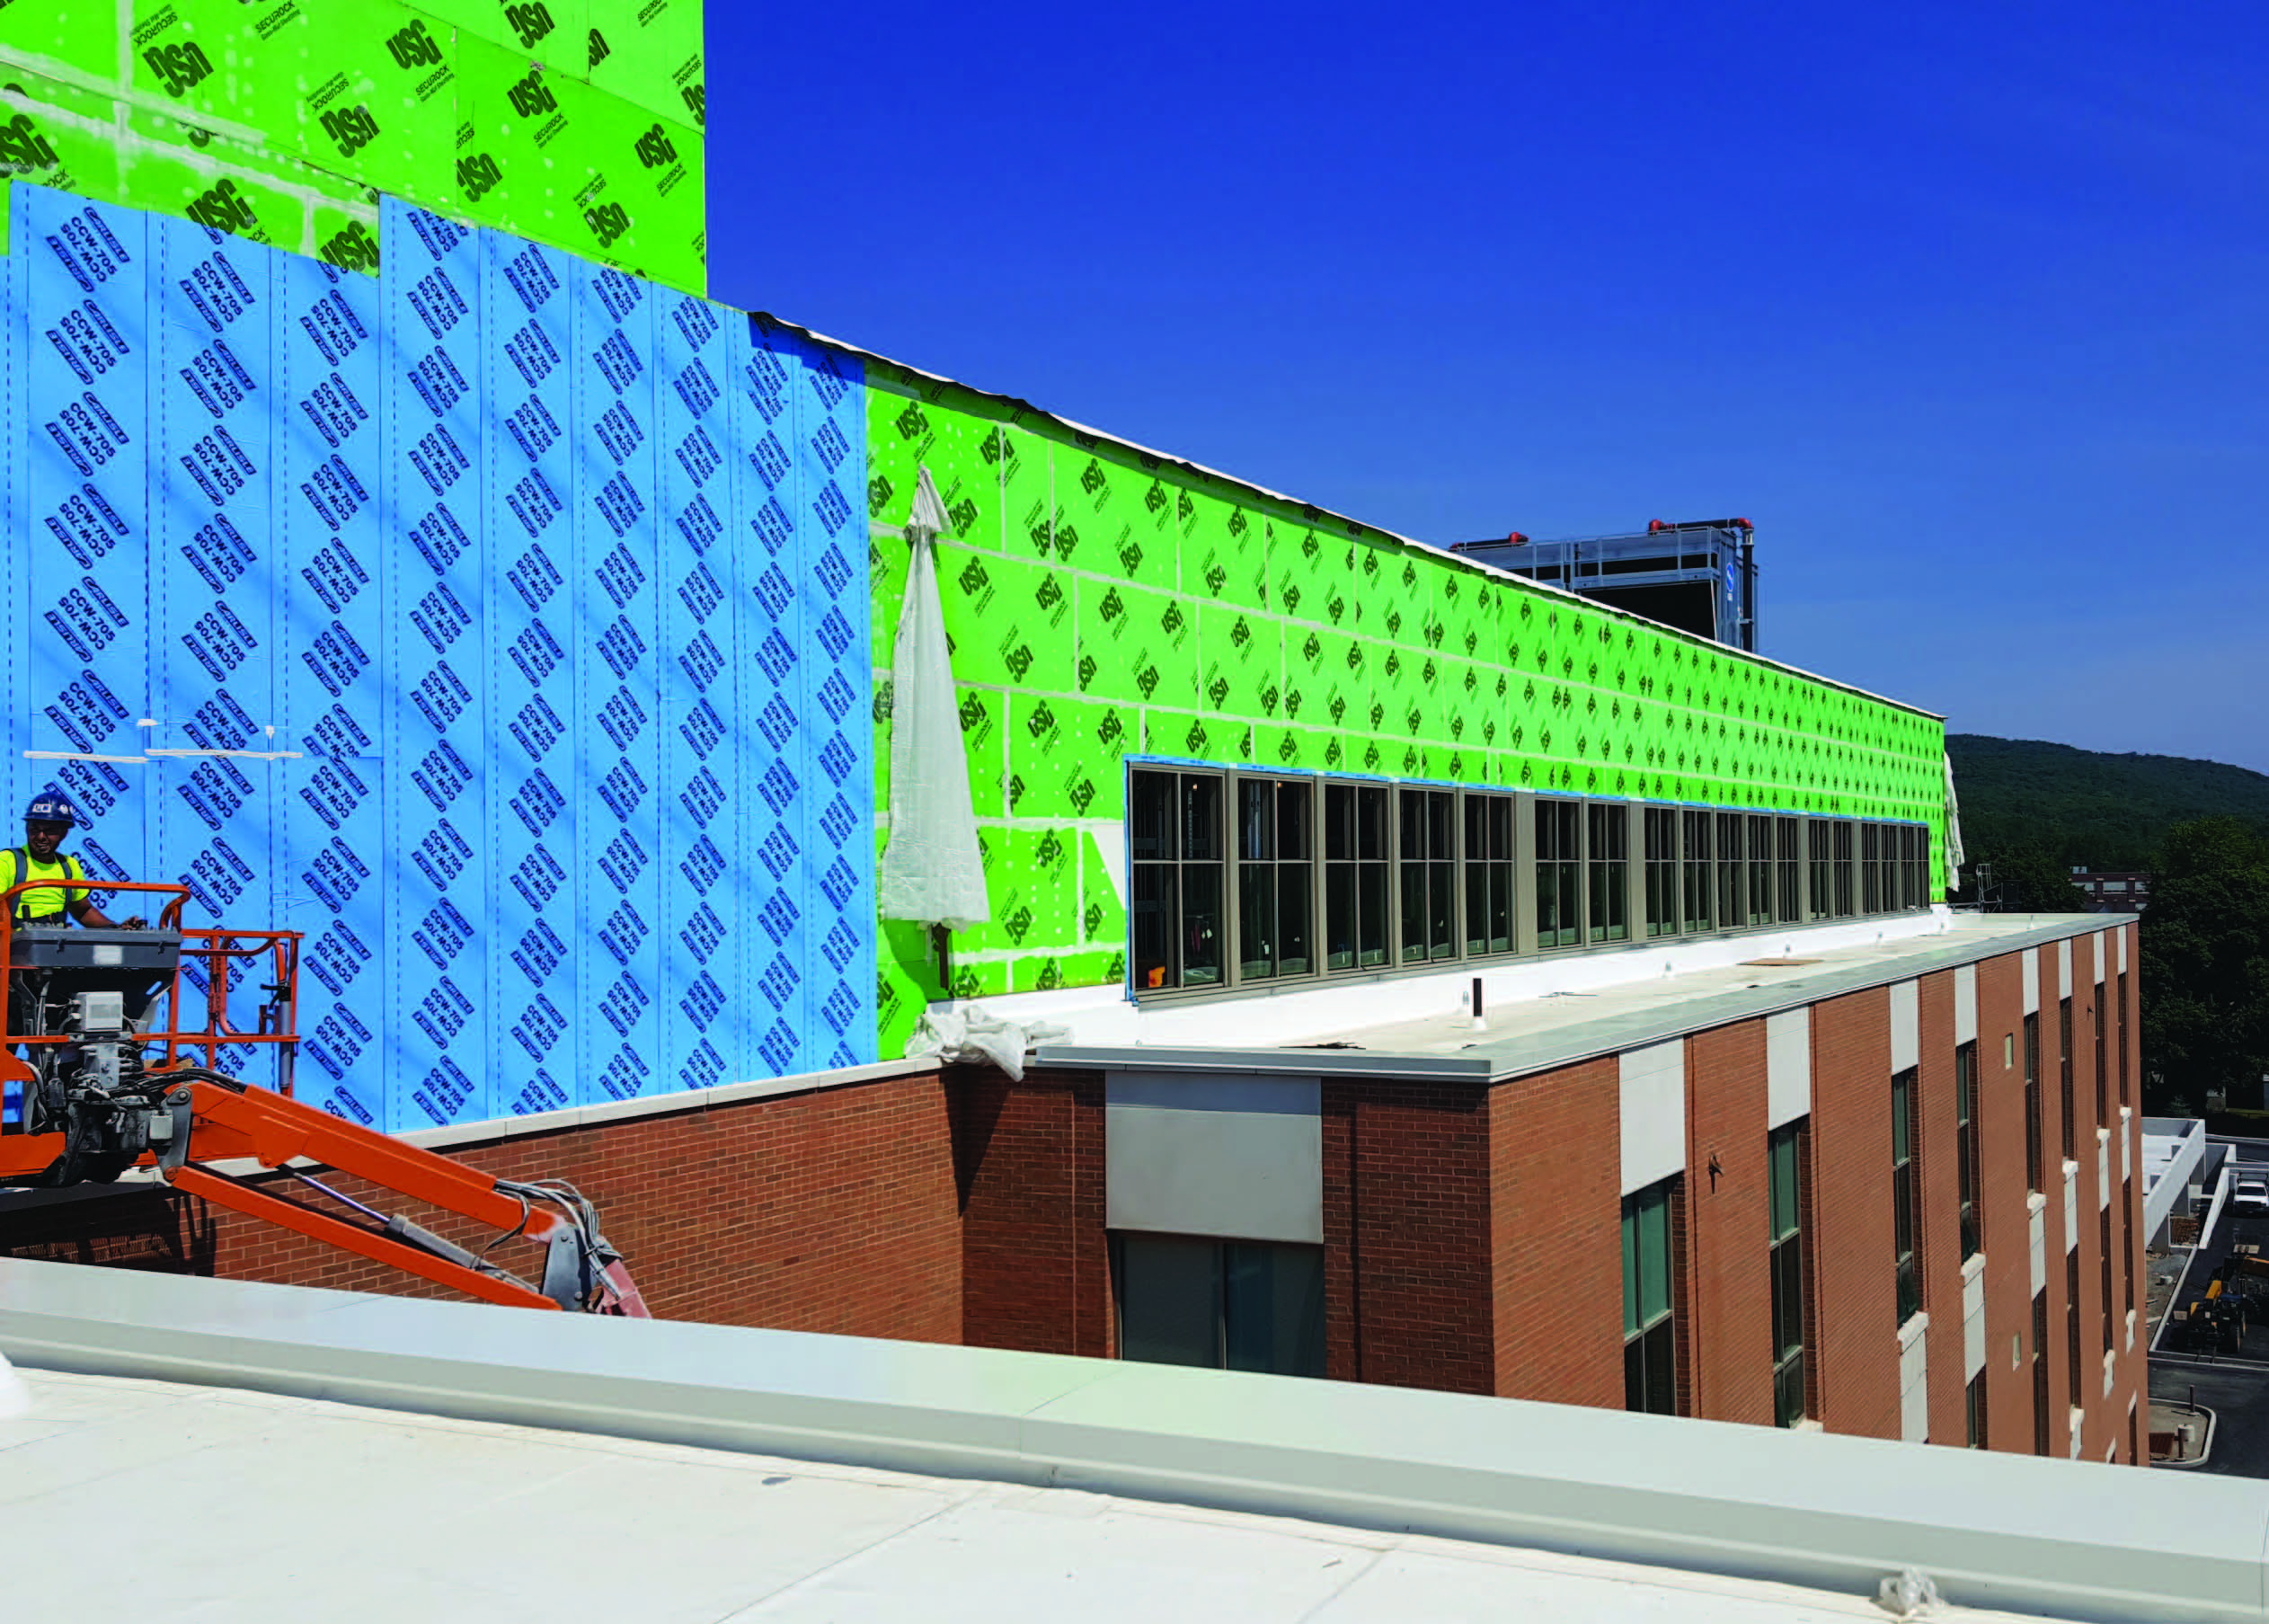 Meeting the demand for high-efficiency façades [AIA course]